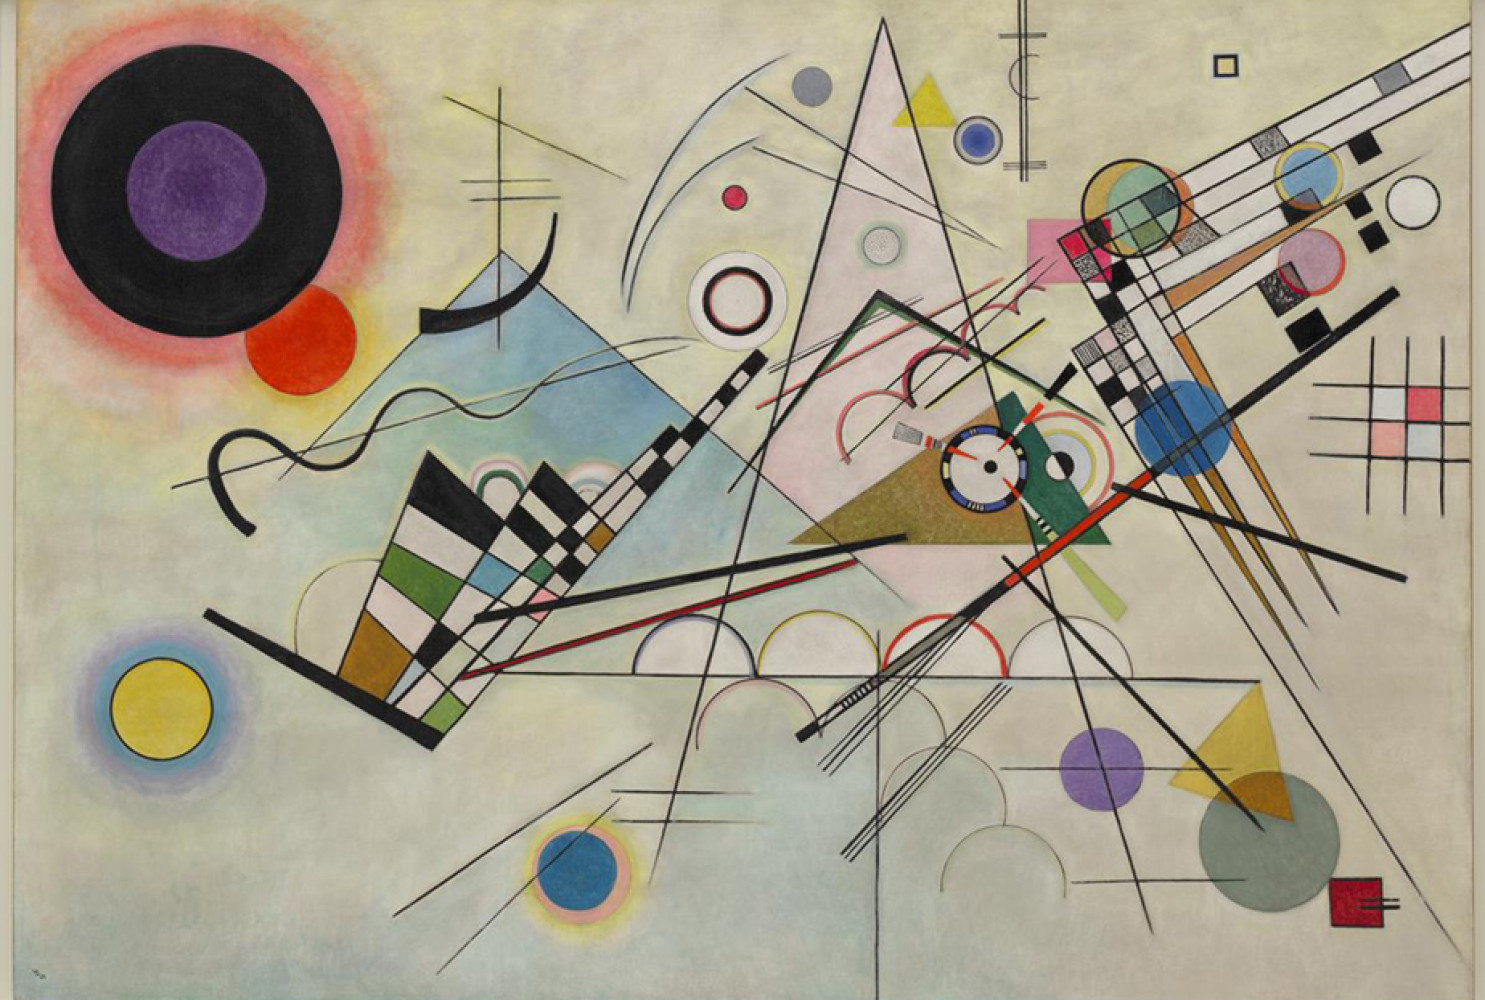 Composition 8, July 1923, by Vasily Kandinsky (1866-1944); Oil on canvas; 55 1/8 x 79 1/8 inches (140 x 201 cm); Solomon R. Guggenheim Museum, New York; Gift of the Solomon R. Guggenheim Founding Collection; 37.262. Copyright: 2016 Artists Rights Society (ARS), New York / ADAGP
